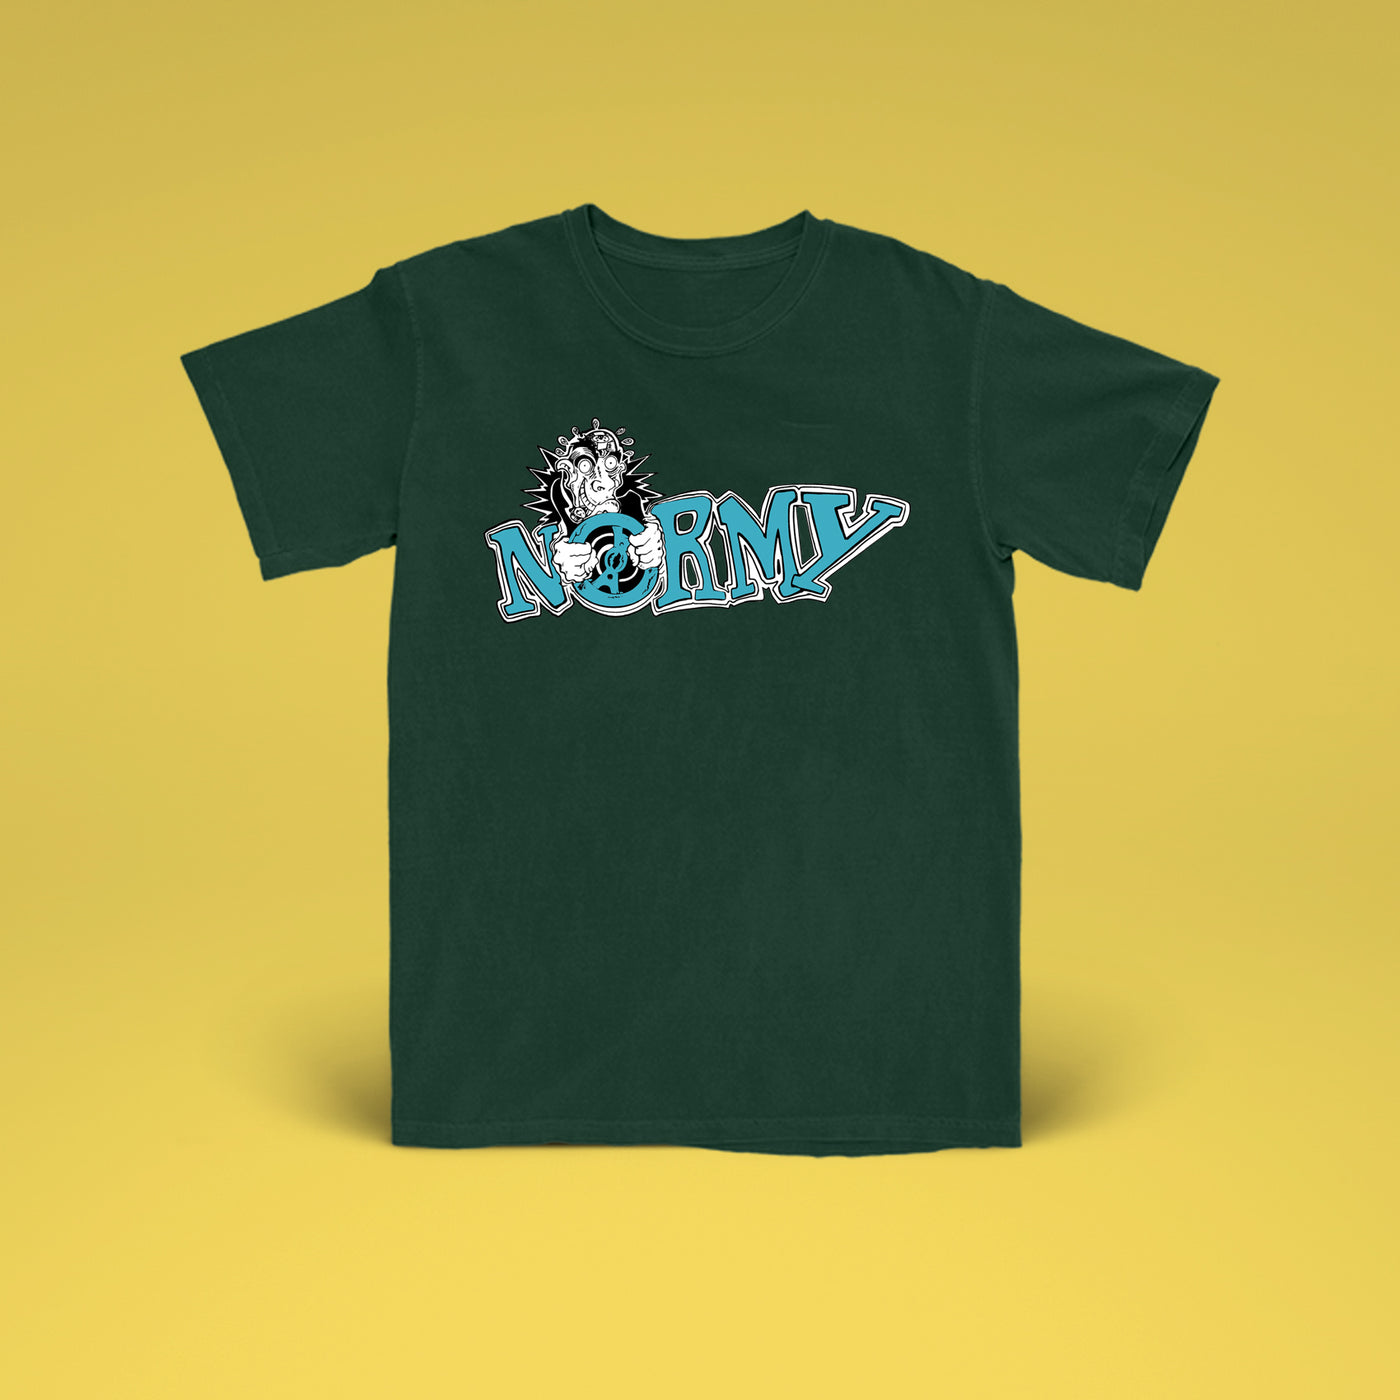 NORMY - NORMYfx Shirt